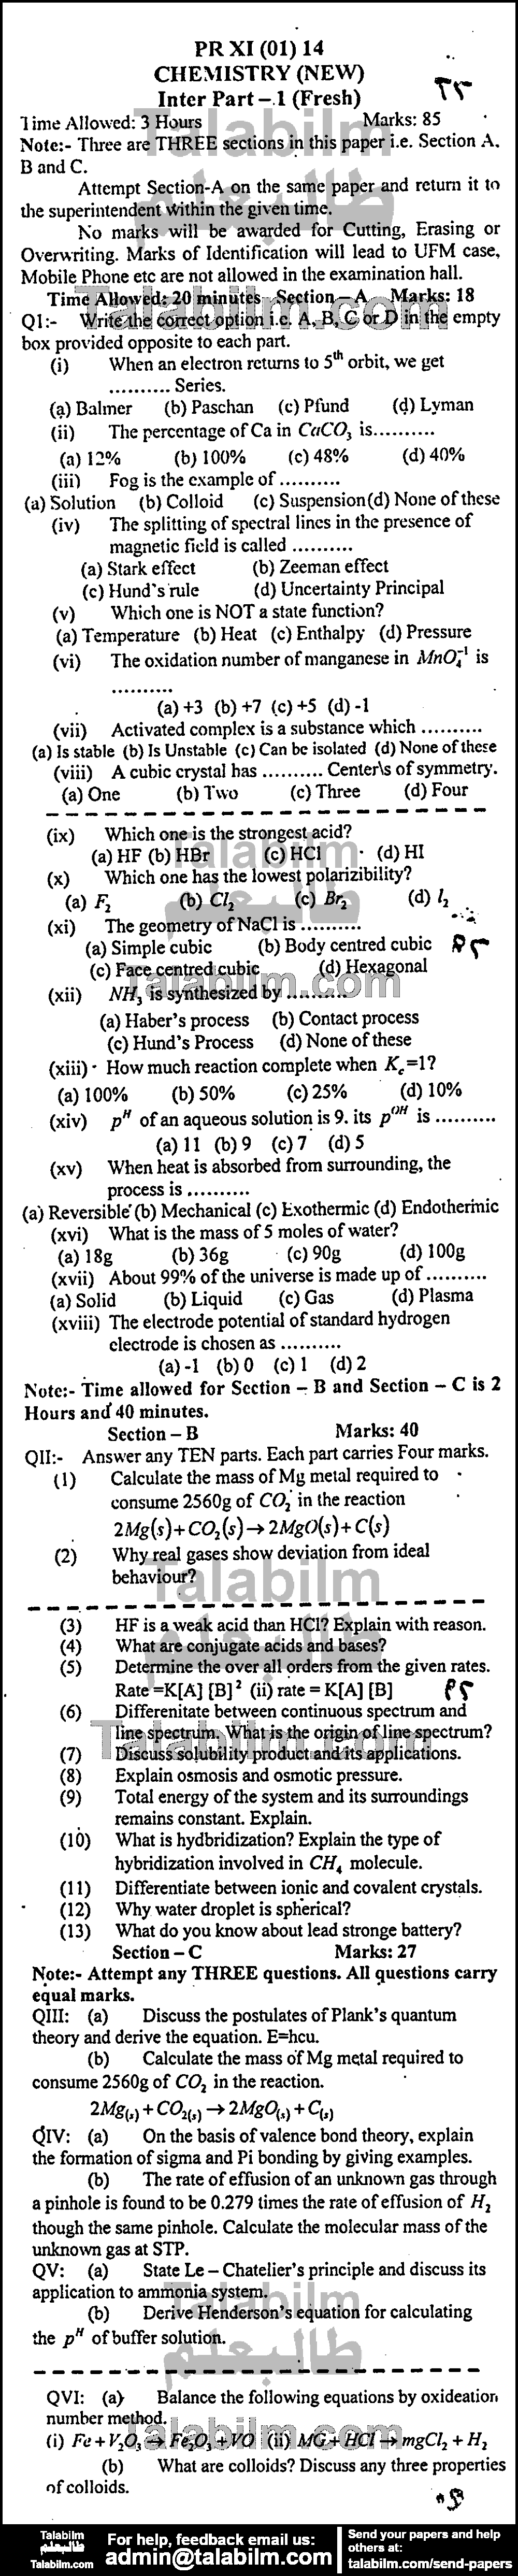 Chemistry 0 past paper for Group-I 2014